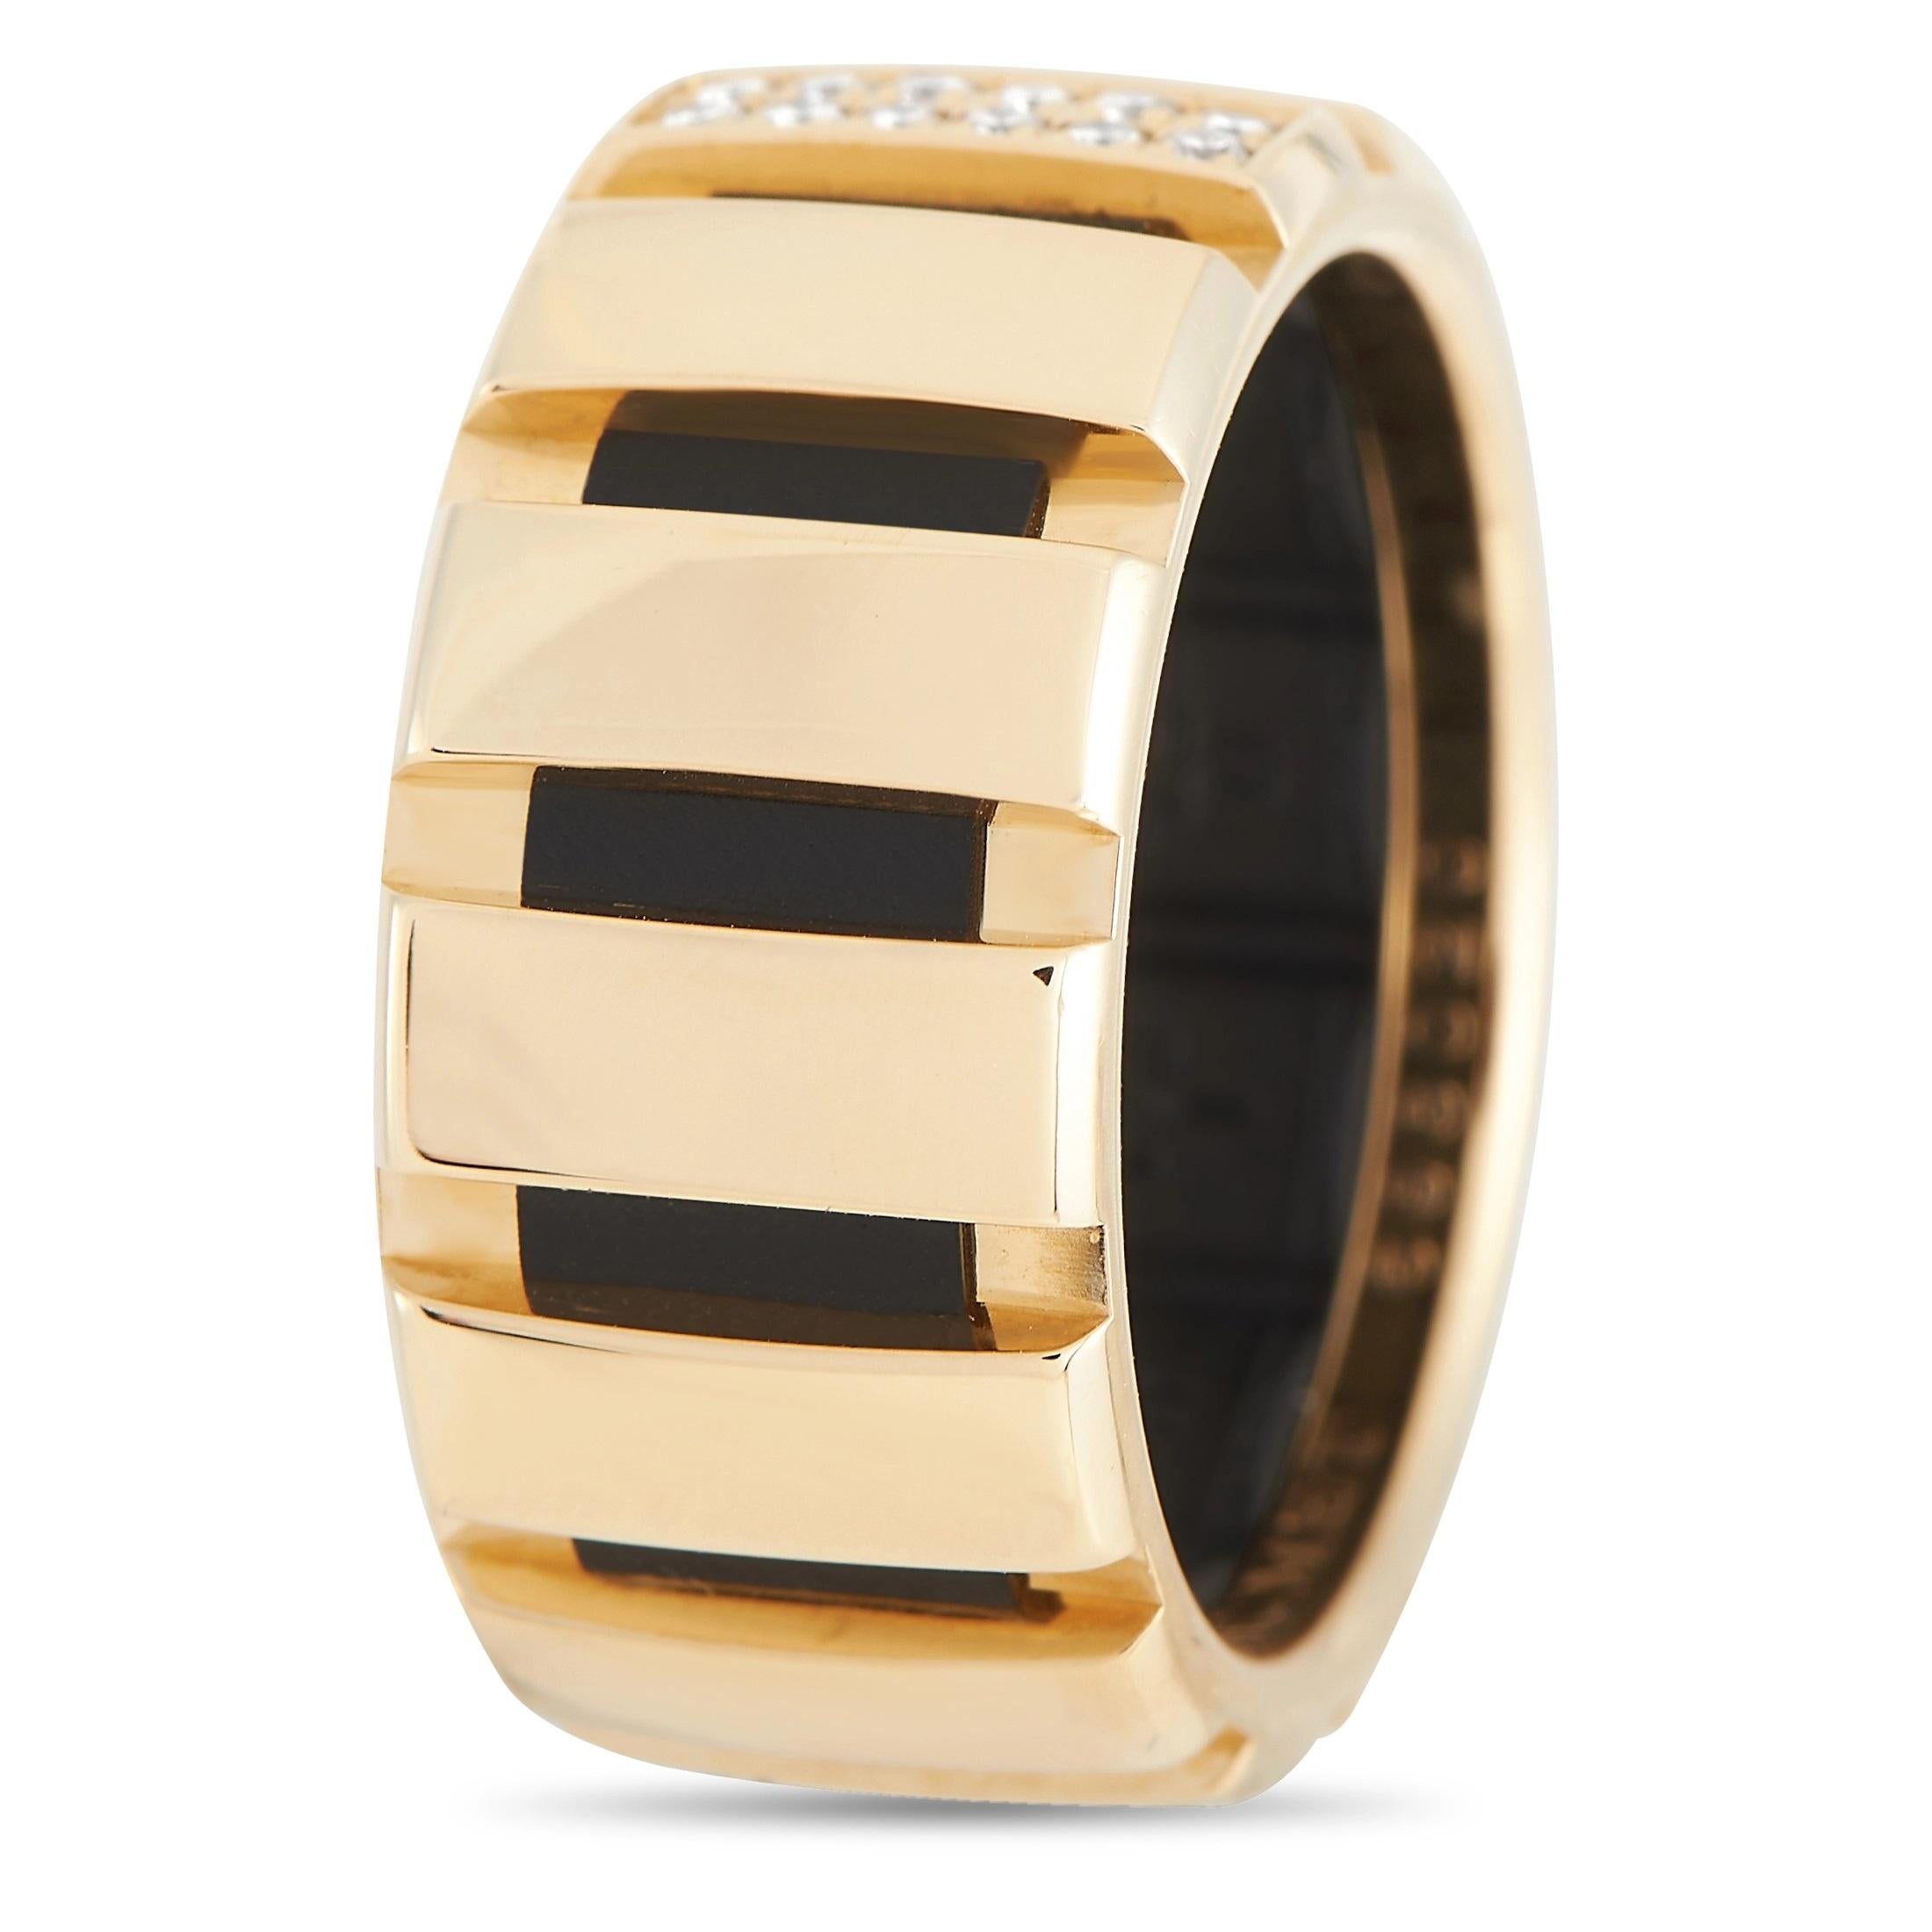 This Chaumet Class One band ring will continually command attention. The geometric design measures 10mm wide and features a luxurious 18K Yellow Gold setting. A double row of round-cut diamonds adds a touch of sparkle and shine. 
 
 This jewelry